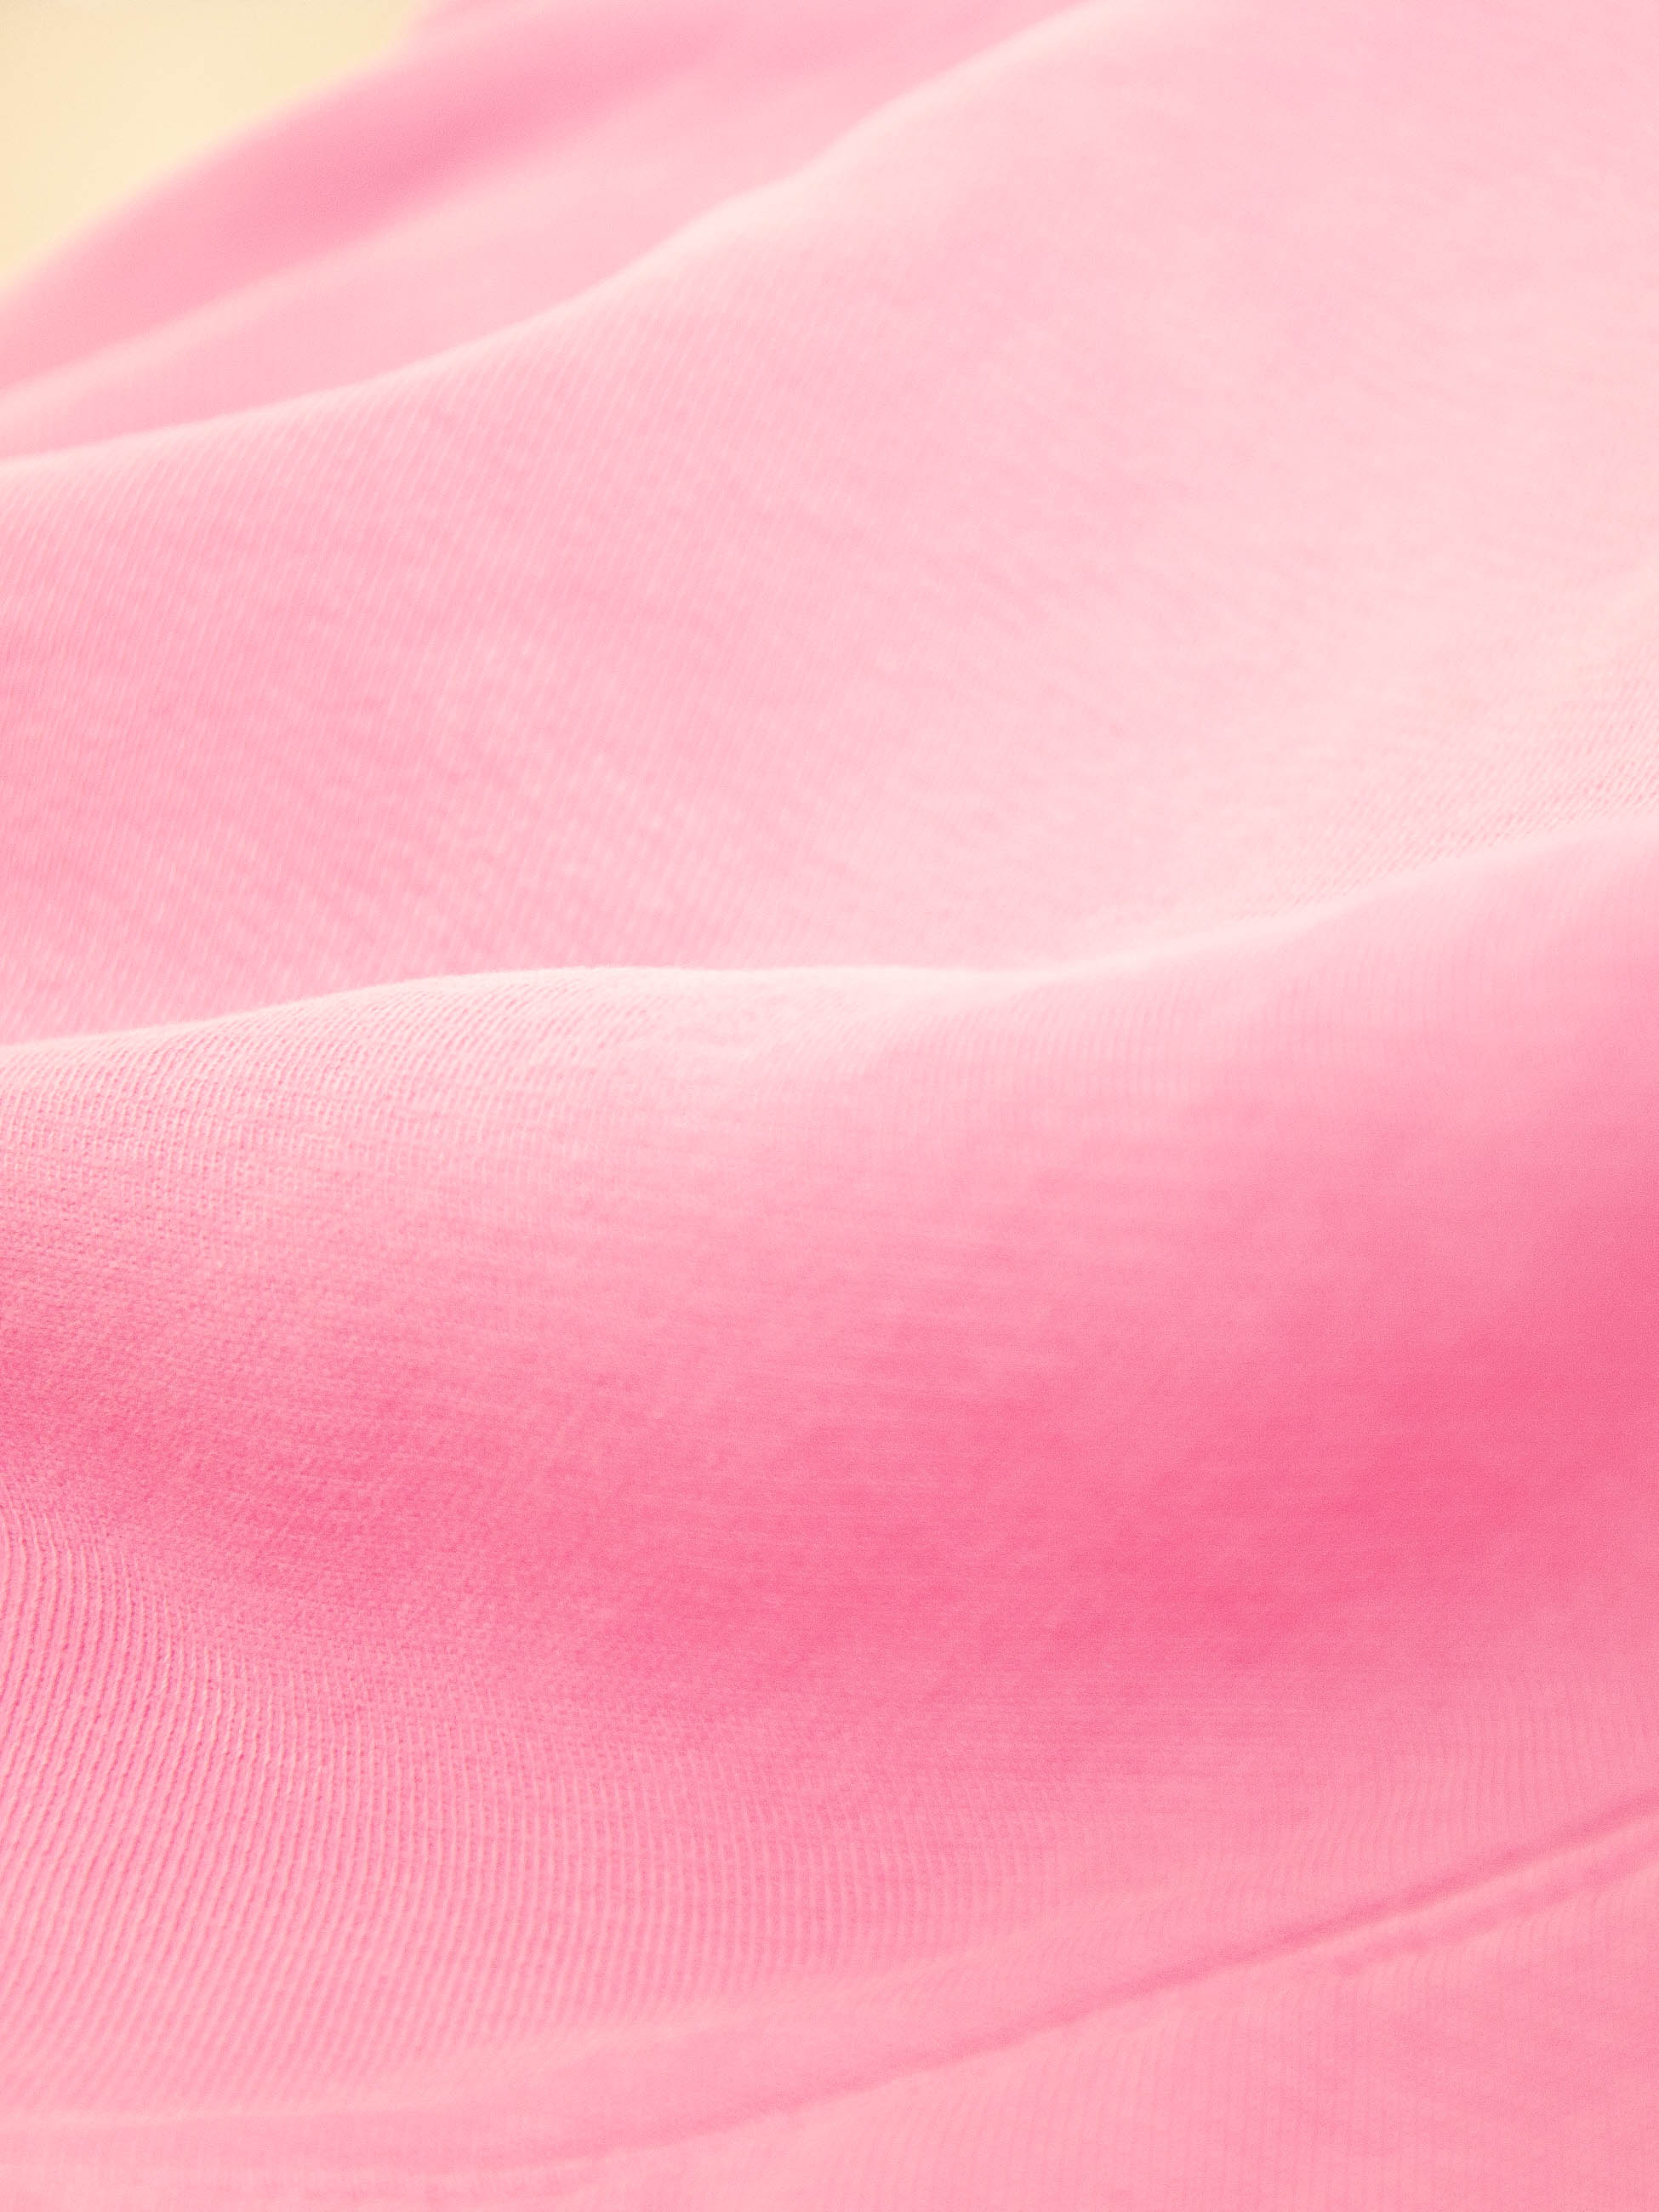 Publik Brand Single Layered Hoodie Hollywood Cerise Pink Heavyweight Fleece, all made in USA, fabric detail, texture, softness